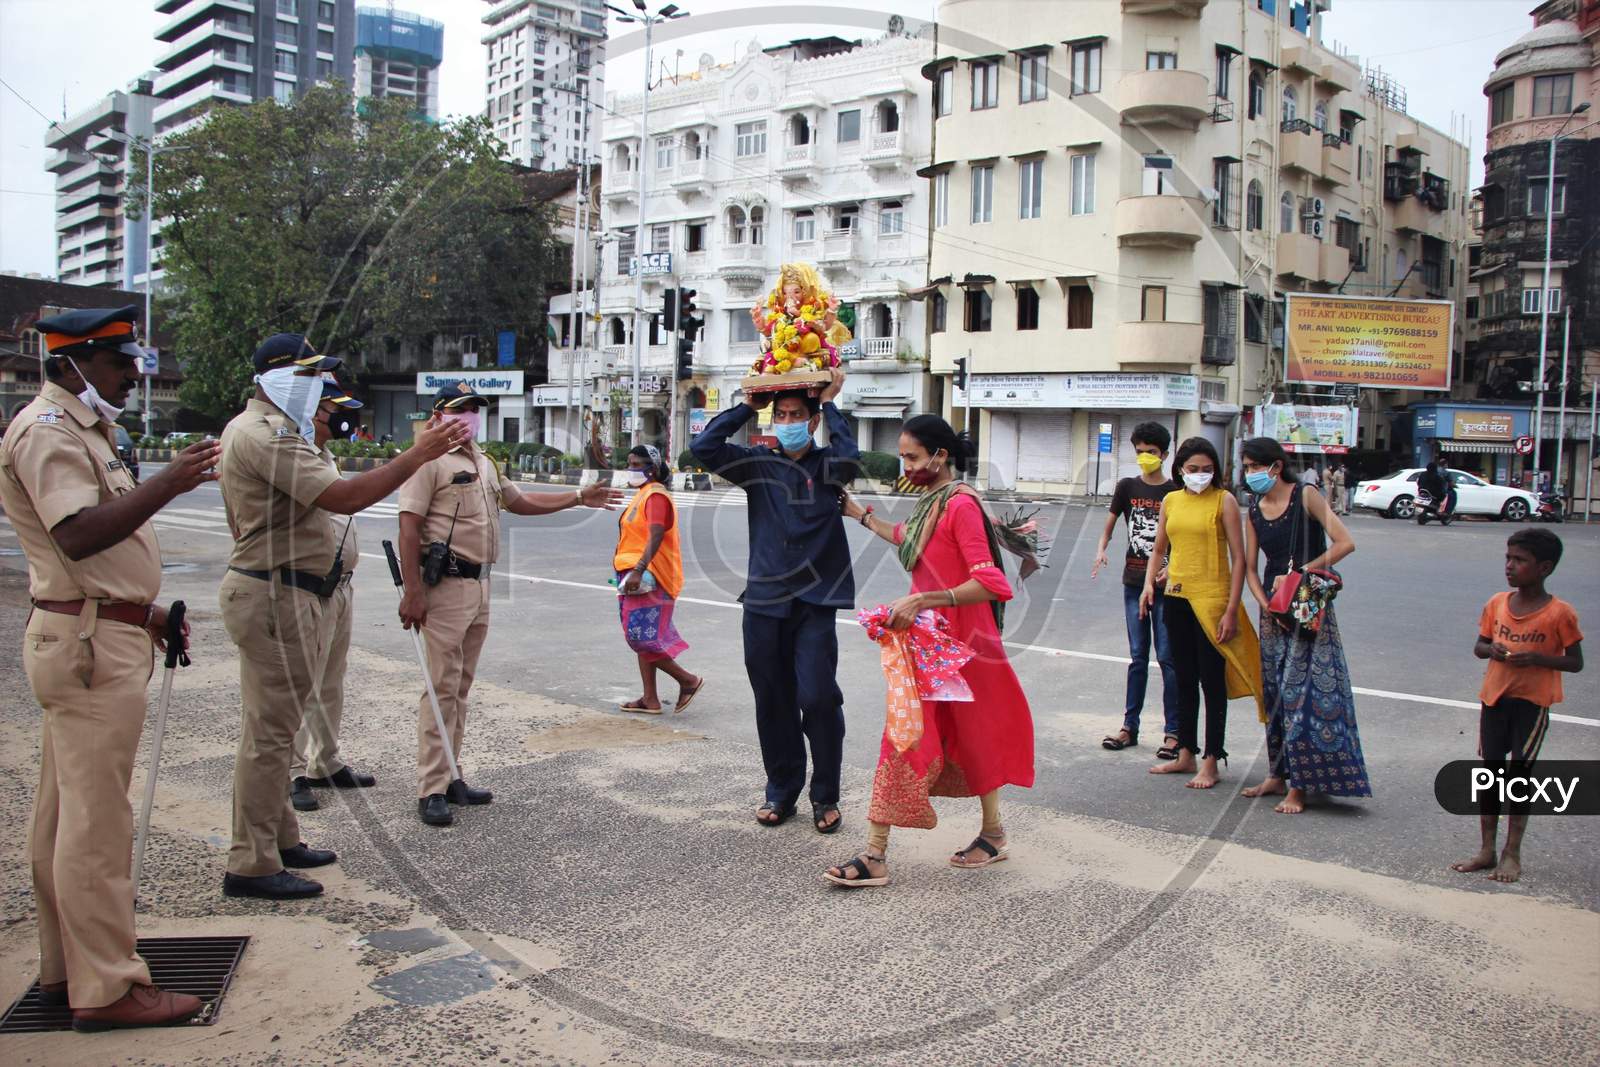 Police personnel are seen ensuring that only two family members with an idol enter for ganesh immersion at Girgoan Chowpatty, during the Ganesh Chaturthi festival in Mumbai, India on August 23, 2020.